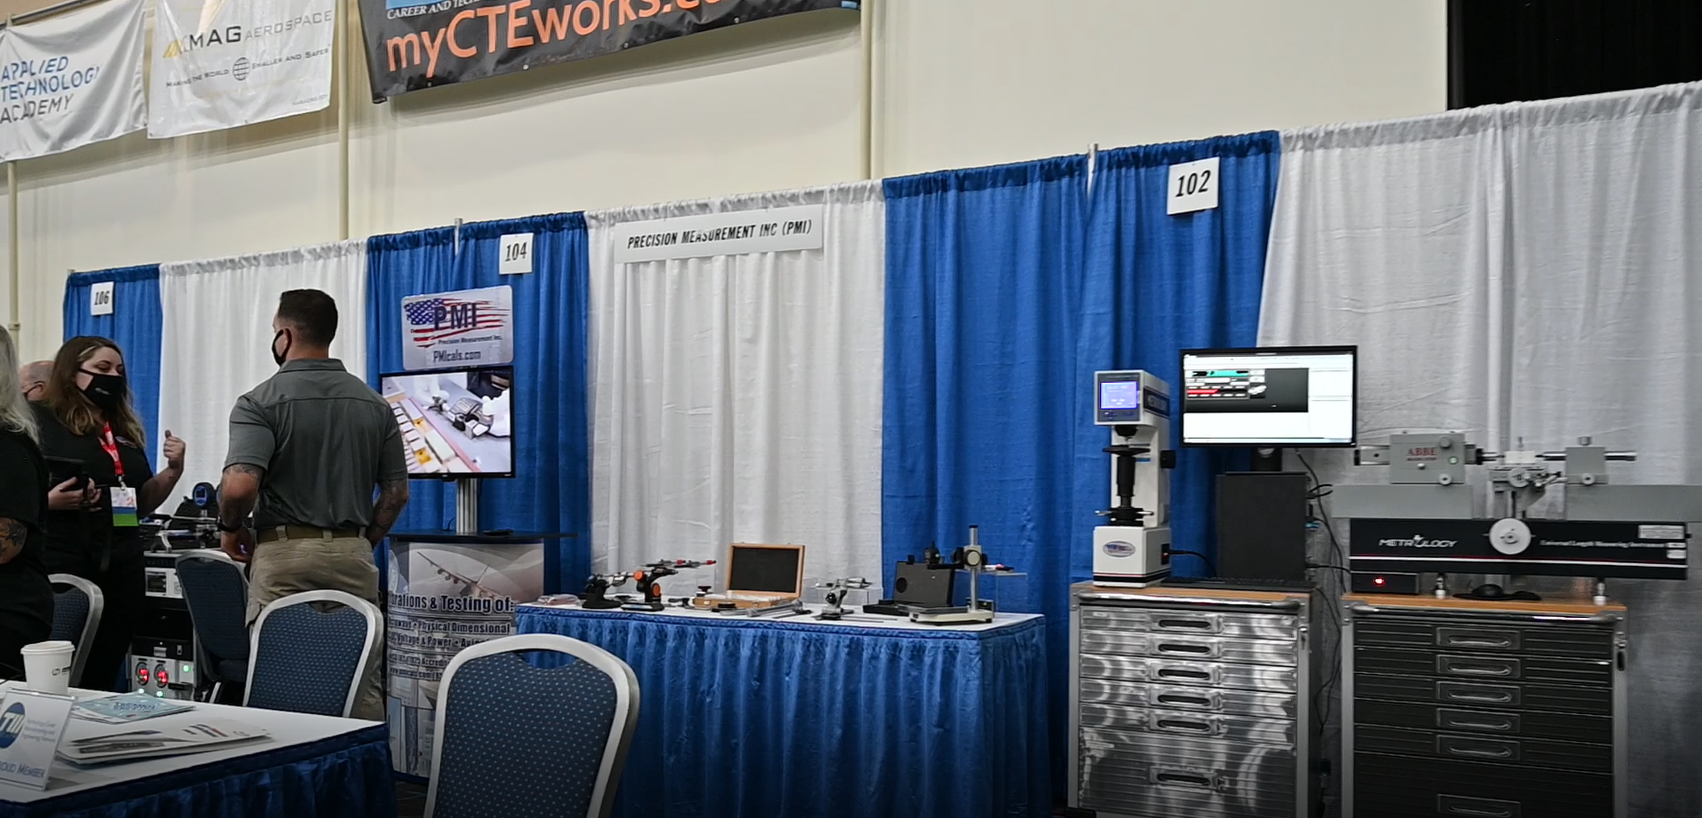 Exhibit booth for Precision Measurement Inc, PMI, at TeCMEN Industry Day